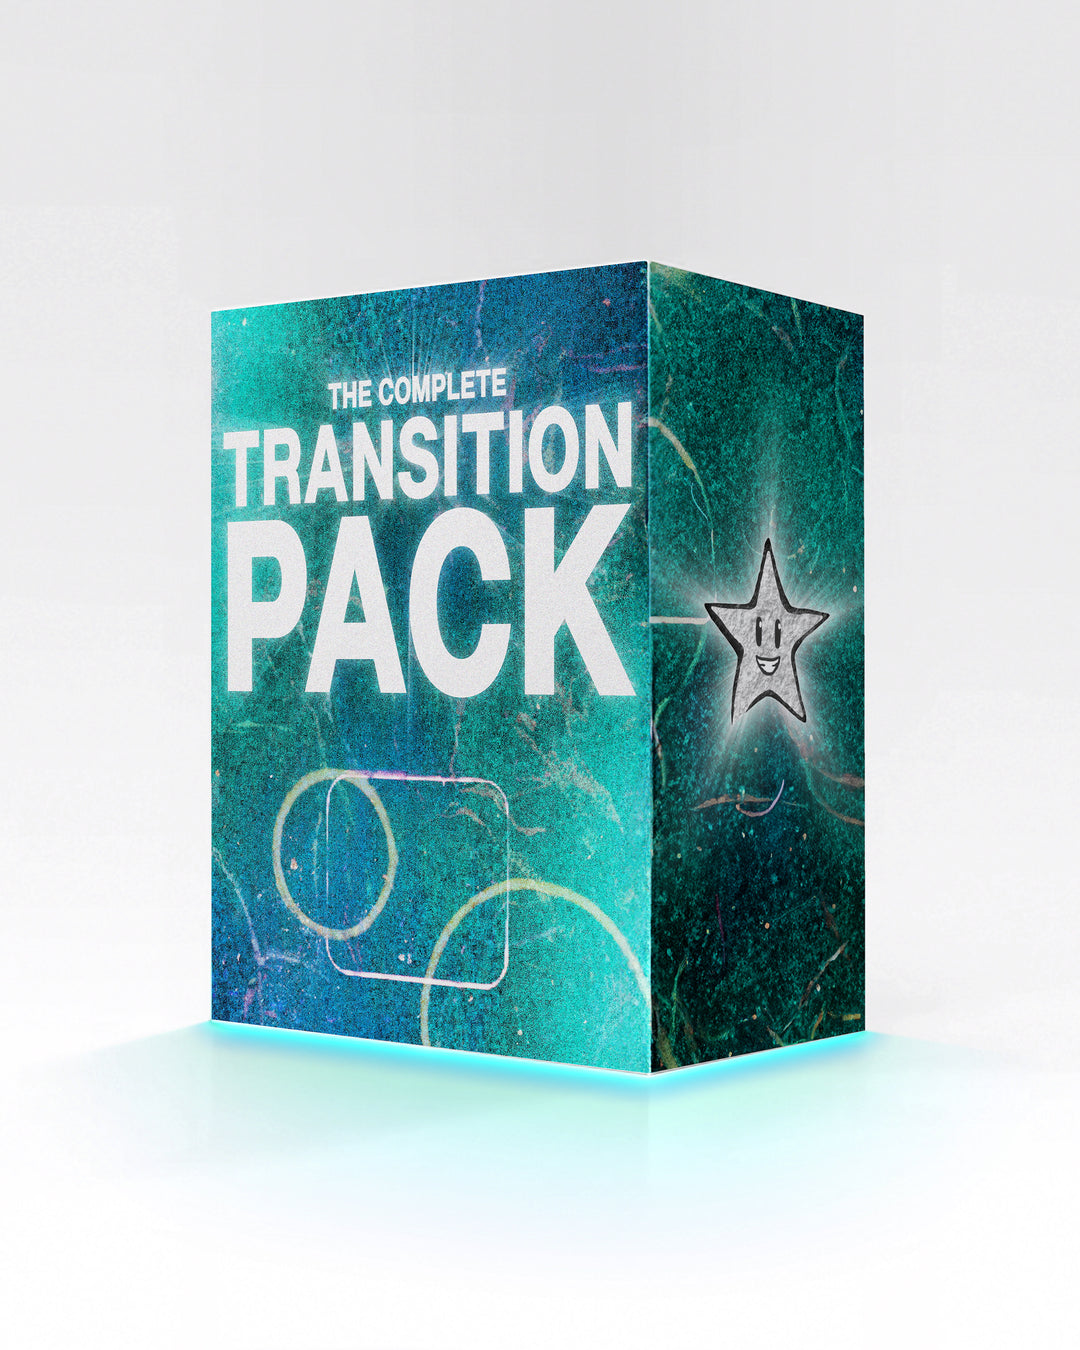 The Complete Transition Pack